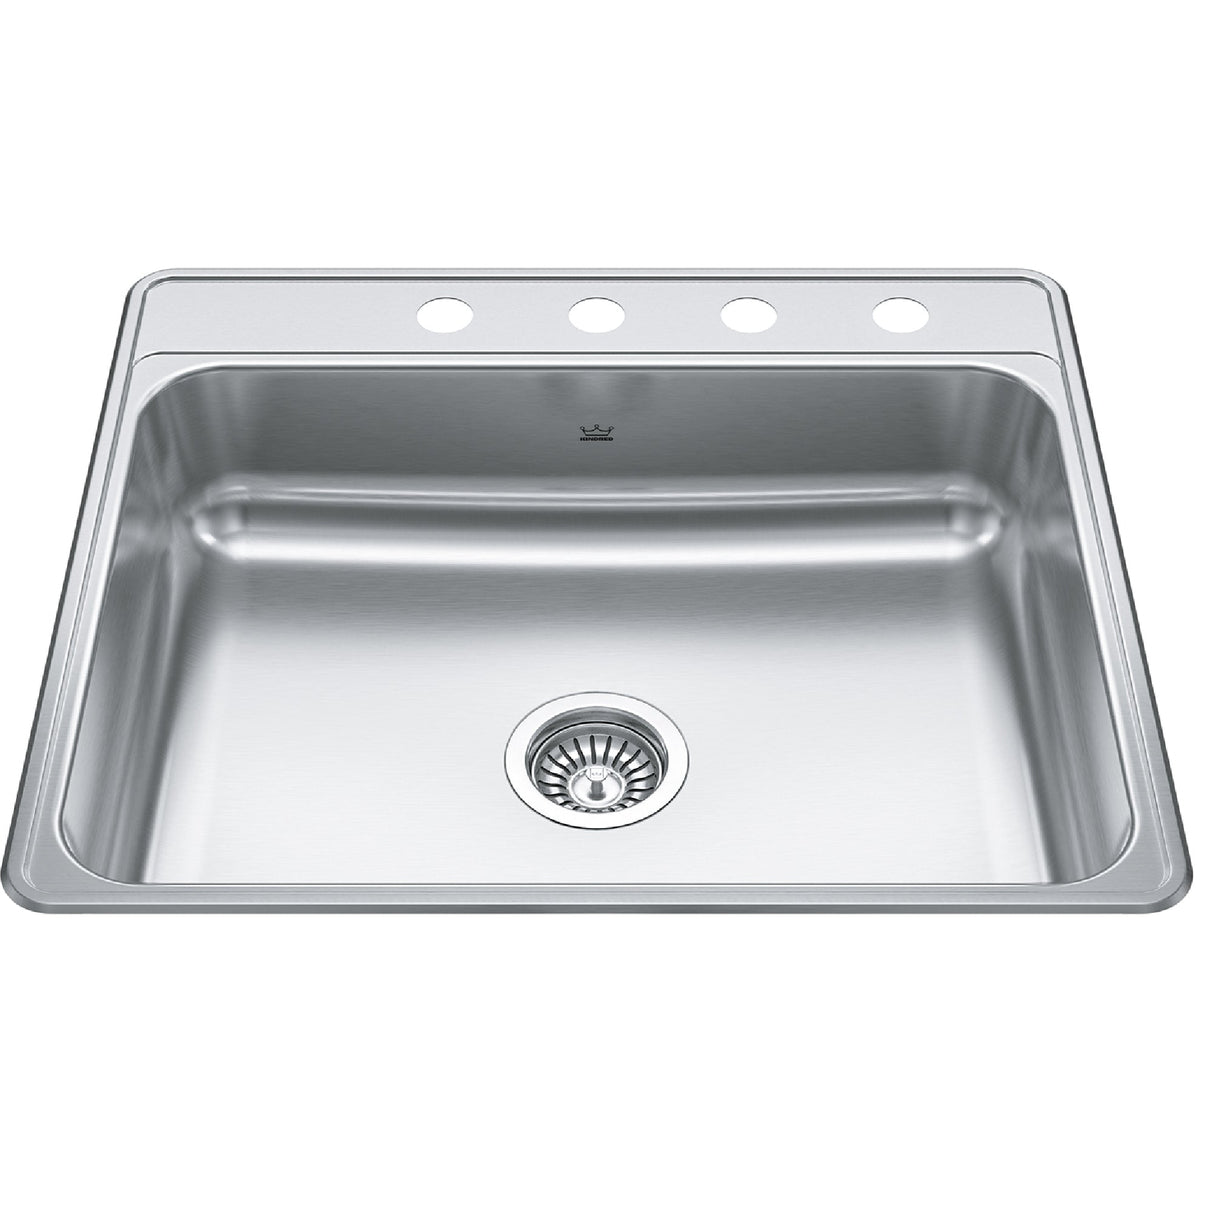 KINDRED CSLA2522-7-4N Creemore 25-in LR x 22-in FB x 7-in DP Drop In Single Bowl 4-Hole Stainless Steel Kitchen Sink In Commercial Satin Finish